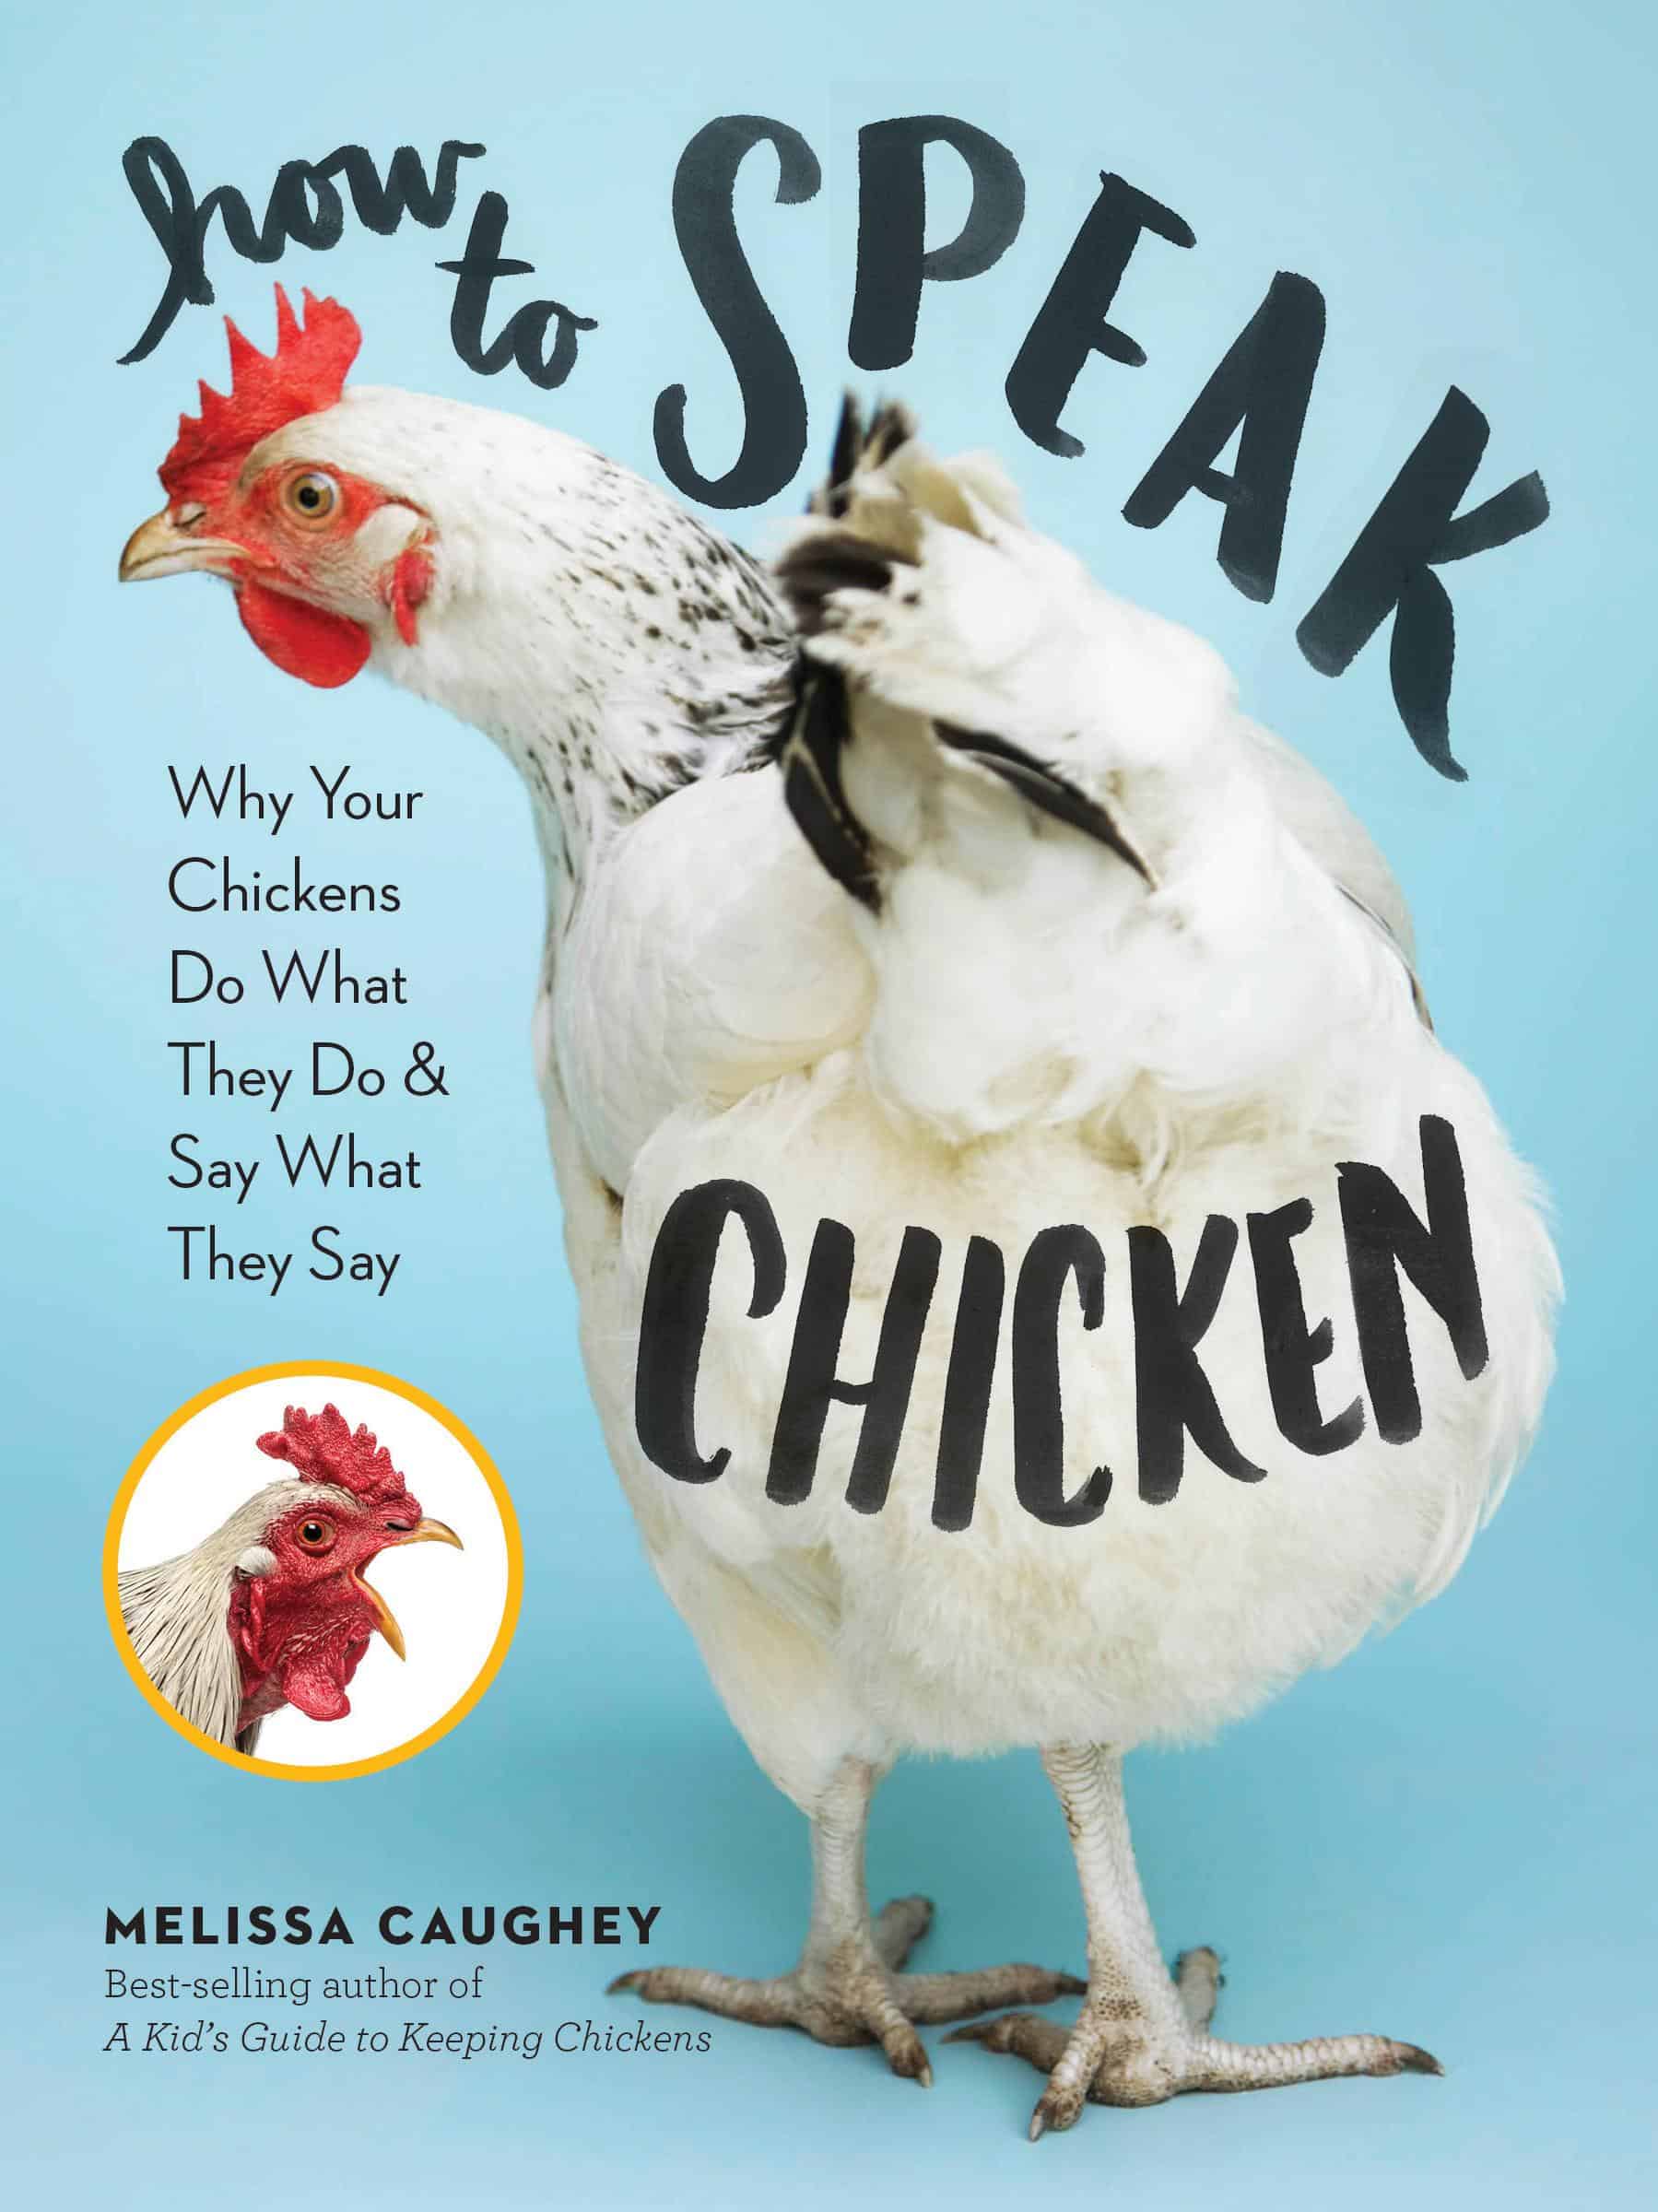 How to Speak Chicken book cover